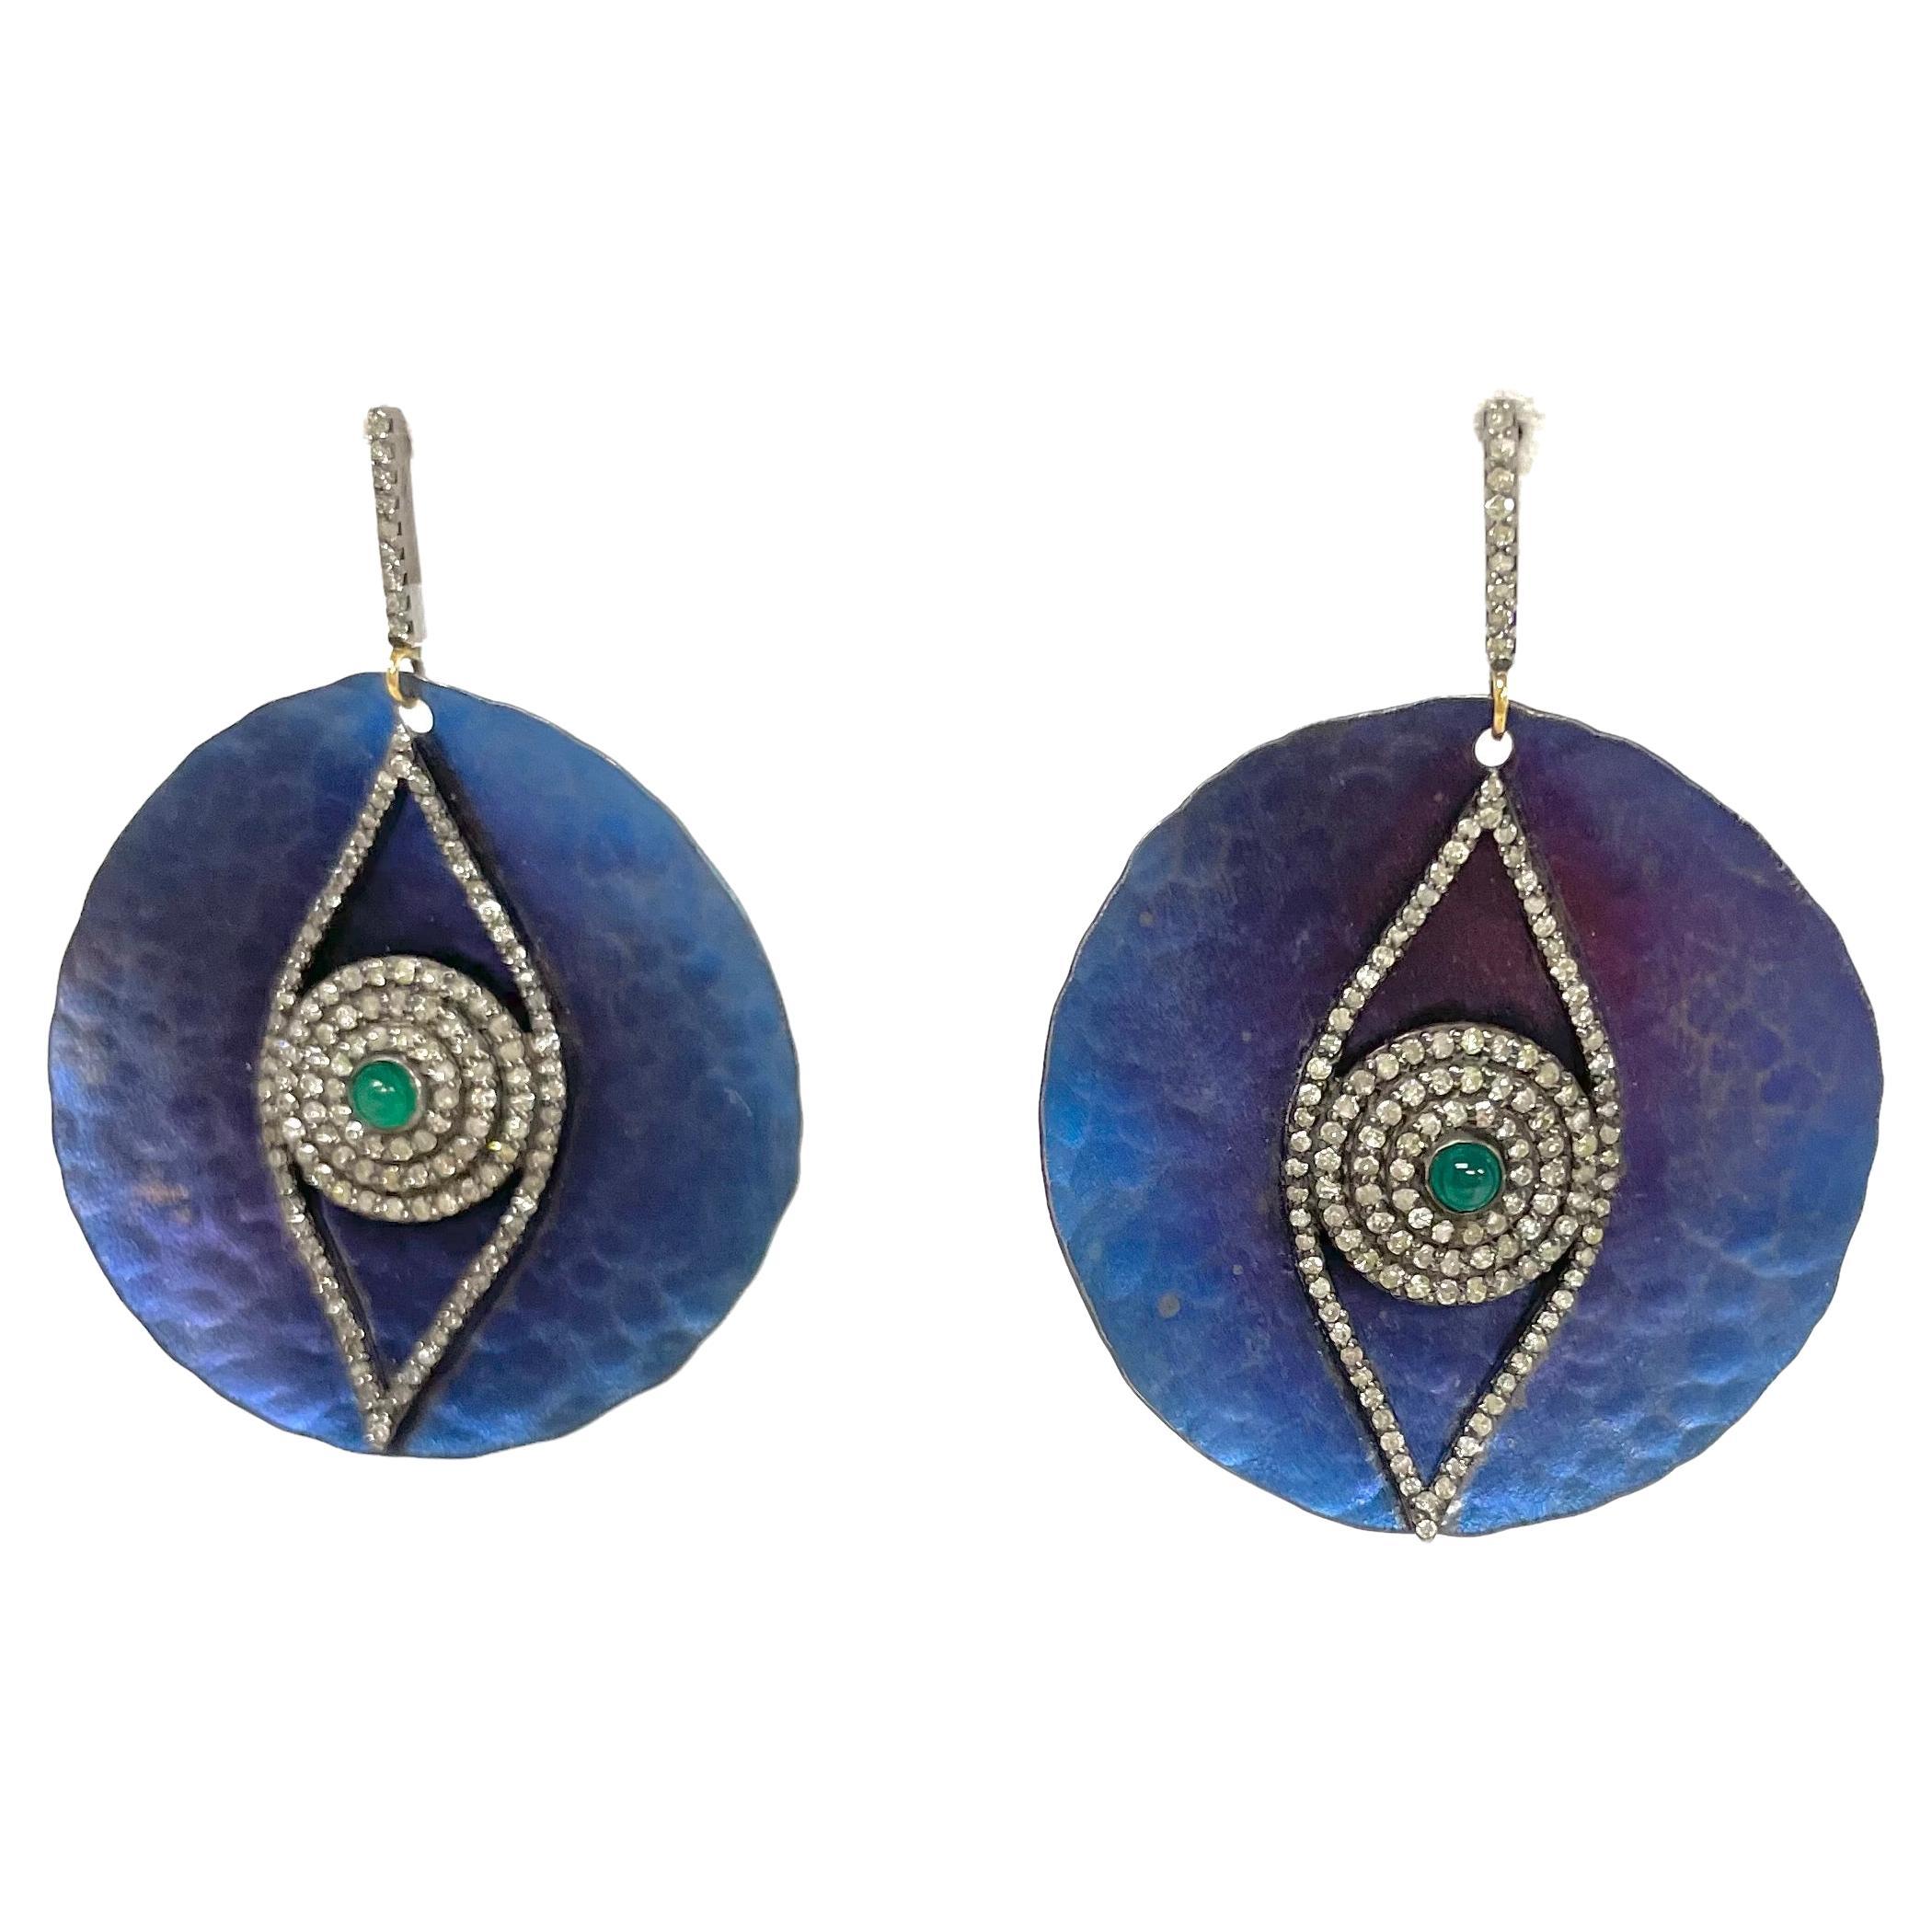  Cobalt Blue Titanium with Emeralds and Diamonds Earrings  For Sale